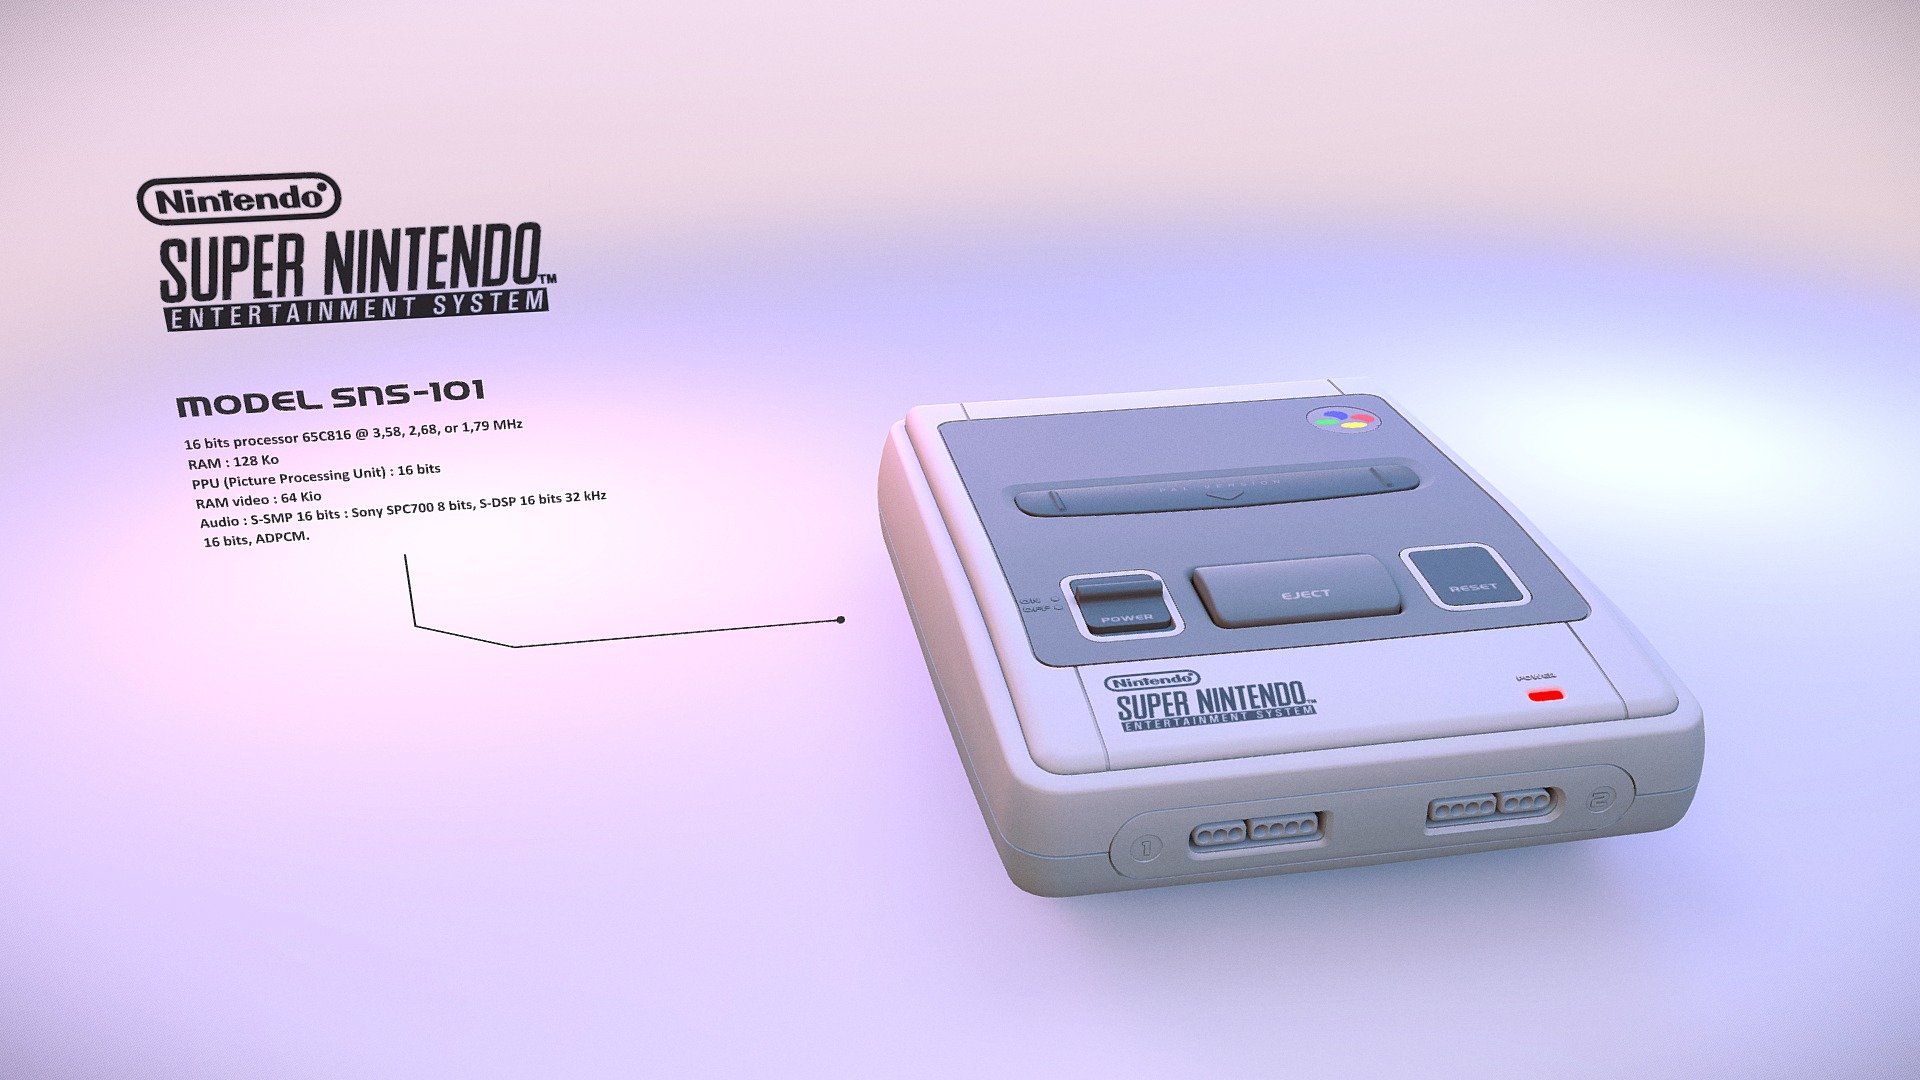 Hello !

I wanted to model what, for me, is an exceptional design and an outstanding console: the Super Nintendo in very details ! Please choose HD textures for the best experience ;-)

Blocked by lack of technical knowledge, I followed the hard surface tutorial of Gleb Alexandrov &amp; Aidy Burrows. Excellent tutorial thanks to them !

My goal was to realize a realistic Super Nintendo on every little details of this gem, from screws to textures, from pictures I took of my console. I hope you enjoy it as much as I enjoyed doing it (and sorry for my poor english ^^).

Greg - Super NES model SNS-101 (FRG) - Hardsurface - Buy Royalty Free 3D model by Sheeloo 3d model